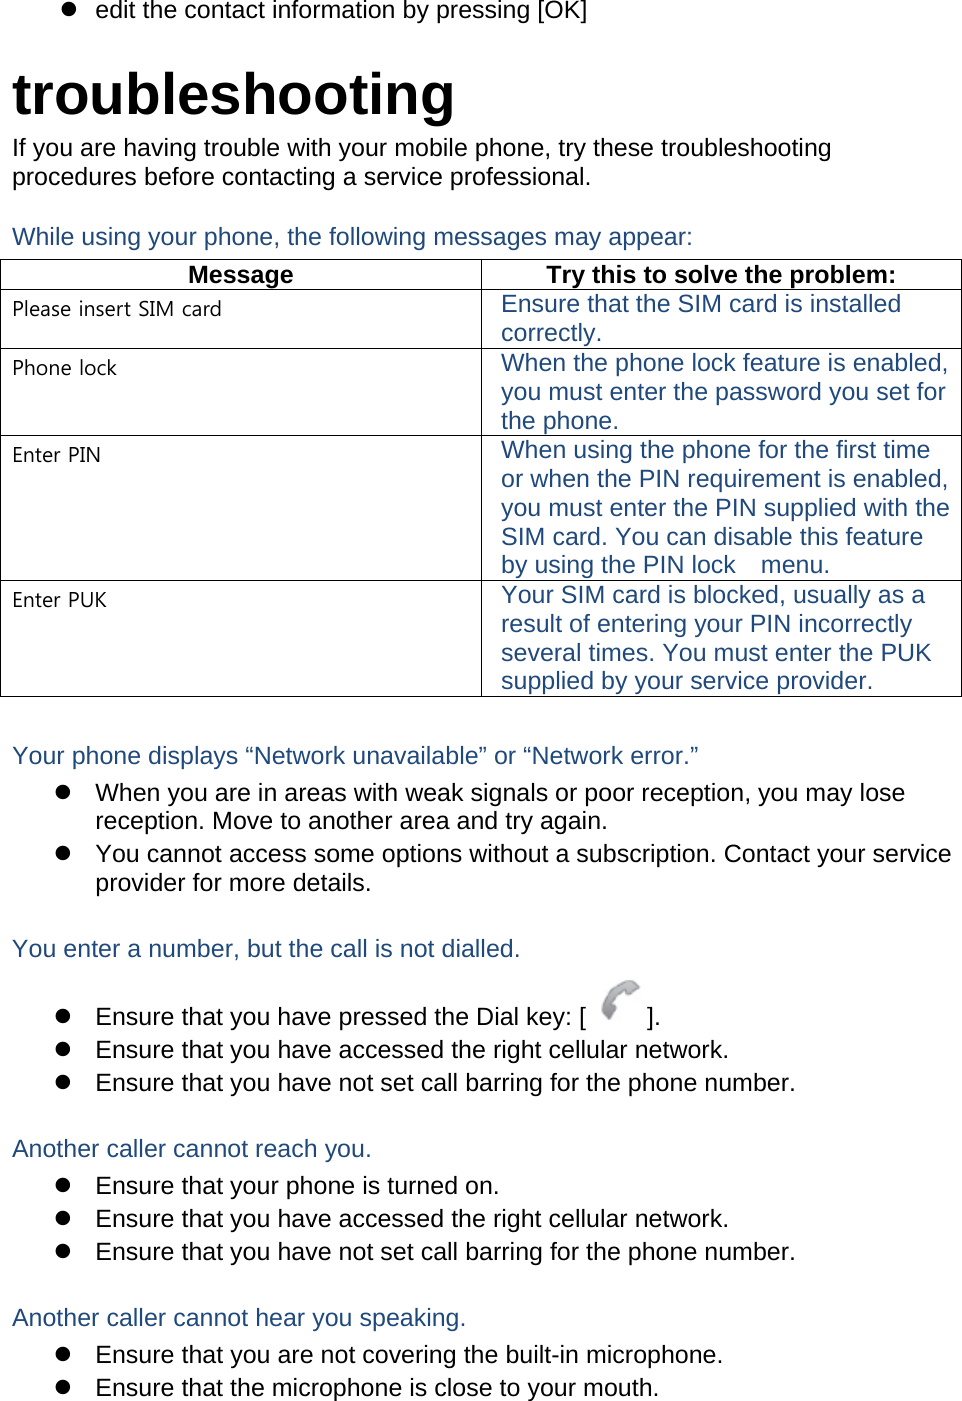   edit the contact information by pressing [OK]  troubleshooting If you are having trouble with your mobile phone, try these troubleshooting procedures before contacting a service professional. While using your phone, the following messages may appear: Message  Try this to solve the problem: Please insert SIM card  Ensure that the SIM card is installed correctly. Phone lock  When the phone lock feature is enabled, you must enter the password you set for the phone. Enter PIN  When using the phone for the first time or when the PIN requirement is enabled, you must enter the PIN supplied with the SIM card. You can disable this feature by using the PIN lock    menu. Enter PUK  Your SIM card is blocked, usually as a result of entering your PIN incorrectly several times. You must enter the PUK supplied by your service provider.    Your phone displays “Network unavailable” or “Network error.”   When you are in areas with weak signals or poor reception, you may lose reception. Move to another area and try again.   You cannot access some options without a subscription. Contact your service provider for more details.  You enter a number, but the call is not dialled.   Ensure that you have pressed the Dial key: [ ].   Ensure that you have accessed the right cellular network.   Ensure that you have not set call barring for the phone number.  Another caller cannot reach you.   Ensure that your phone is turned on.   Ensure that you have accessed the right cellular network.   Ensure that you have not set call barring for the phone number.  Another caller cannot hear you speaking.   Ensure that you are not covering the built-in microphone.   Ensure that the microphone is close to your mouth. 